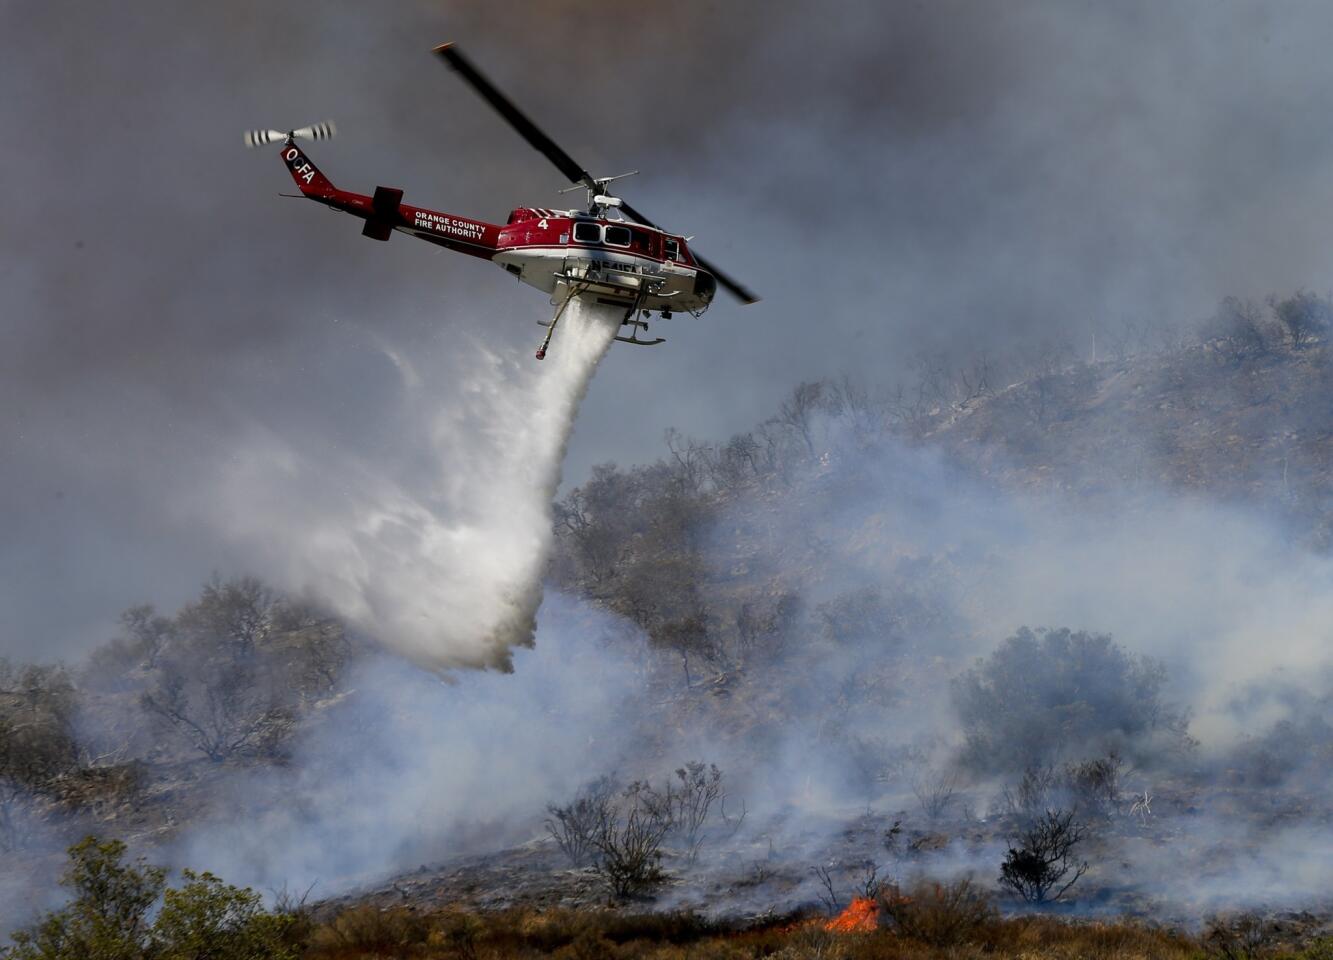 More than 280 firefighters are aided by water dropping helicopters and fixed-wing aircraft as they battle a 1,300-acre fire in Silverado Canyon.